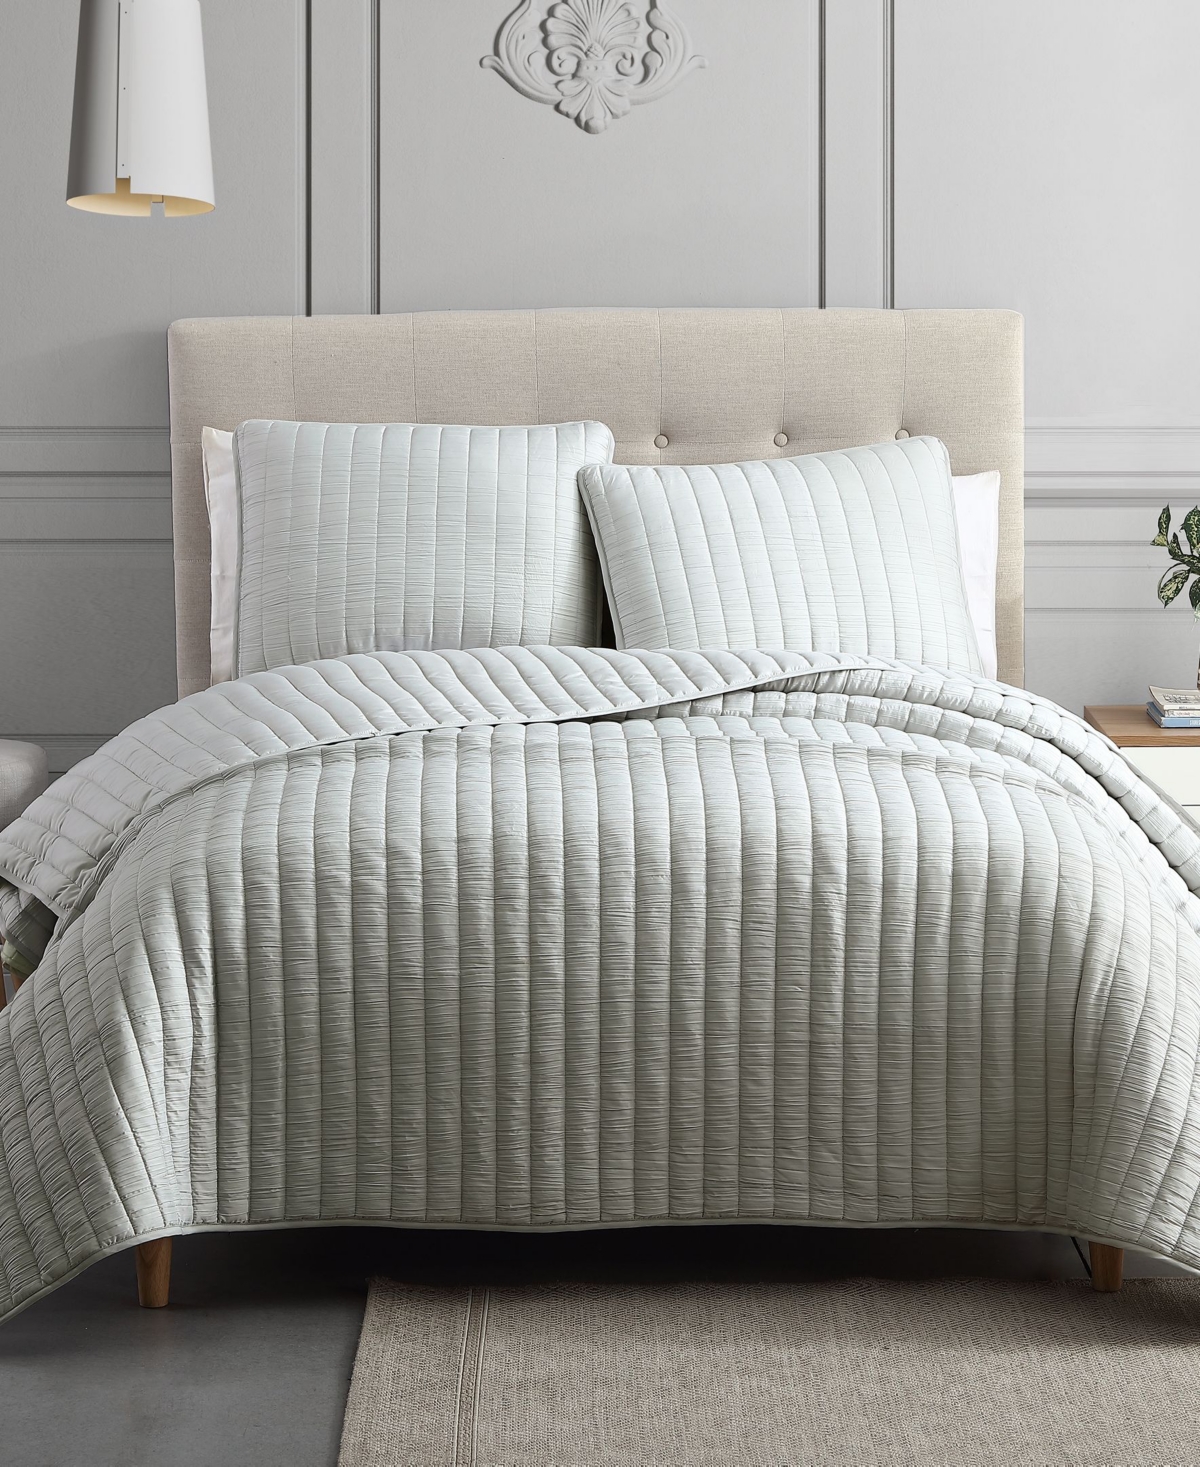 Riverbrook Home Moonstone 3 Piece Full/queen Coverlet Set In Light Gray